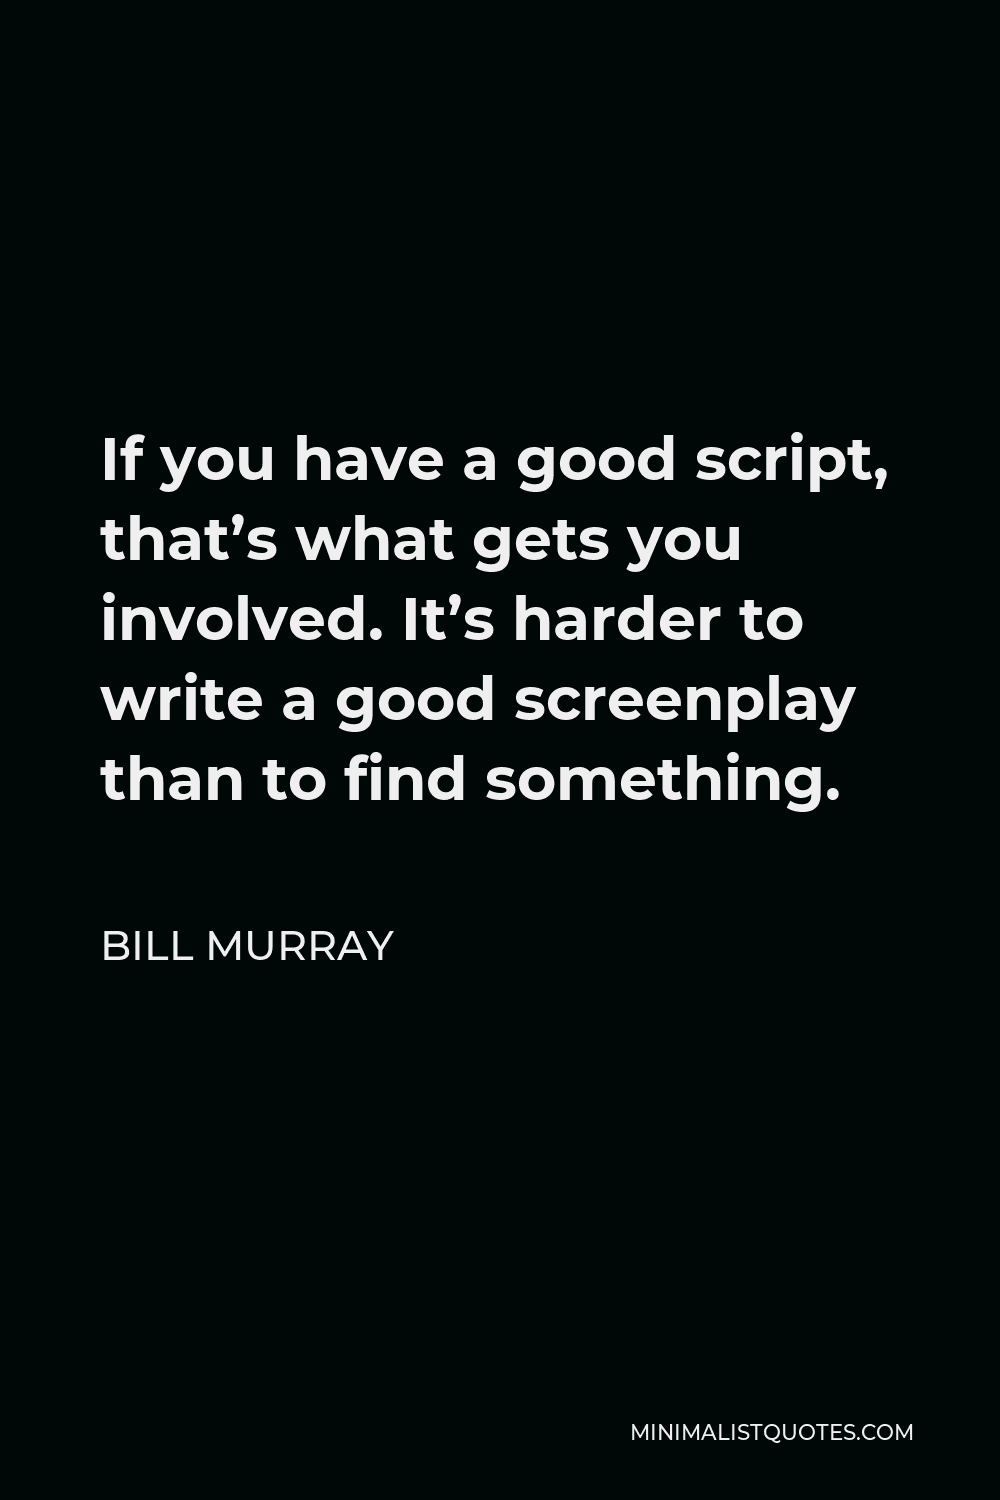 Bill Murray Quote - If you have a good script, that’s what gets you involved. It’s harder to write a good screenplay than to find something.